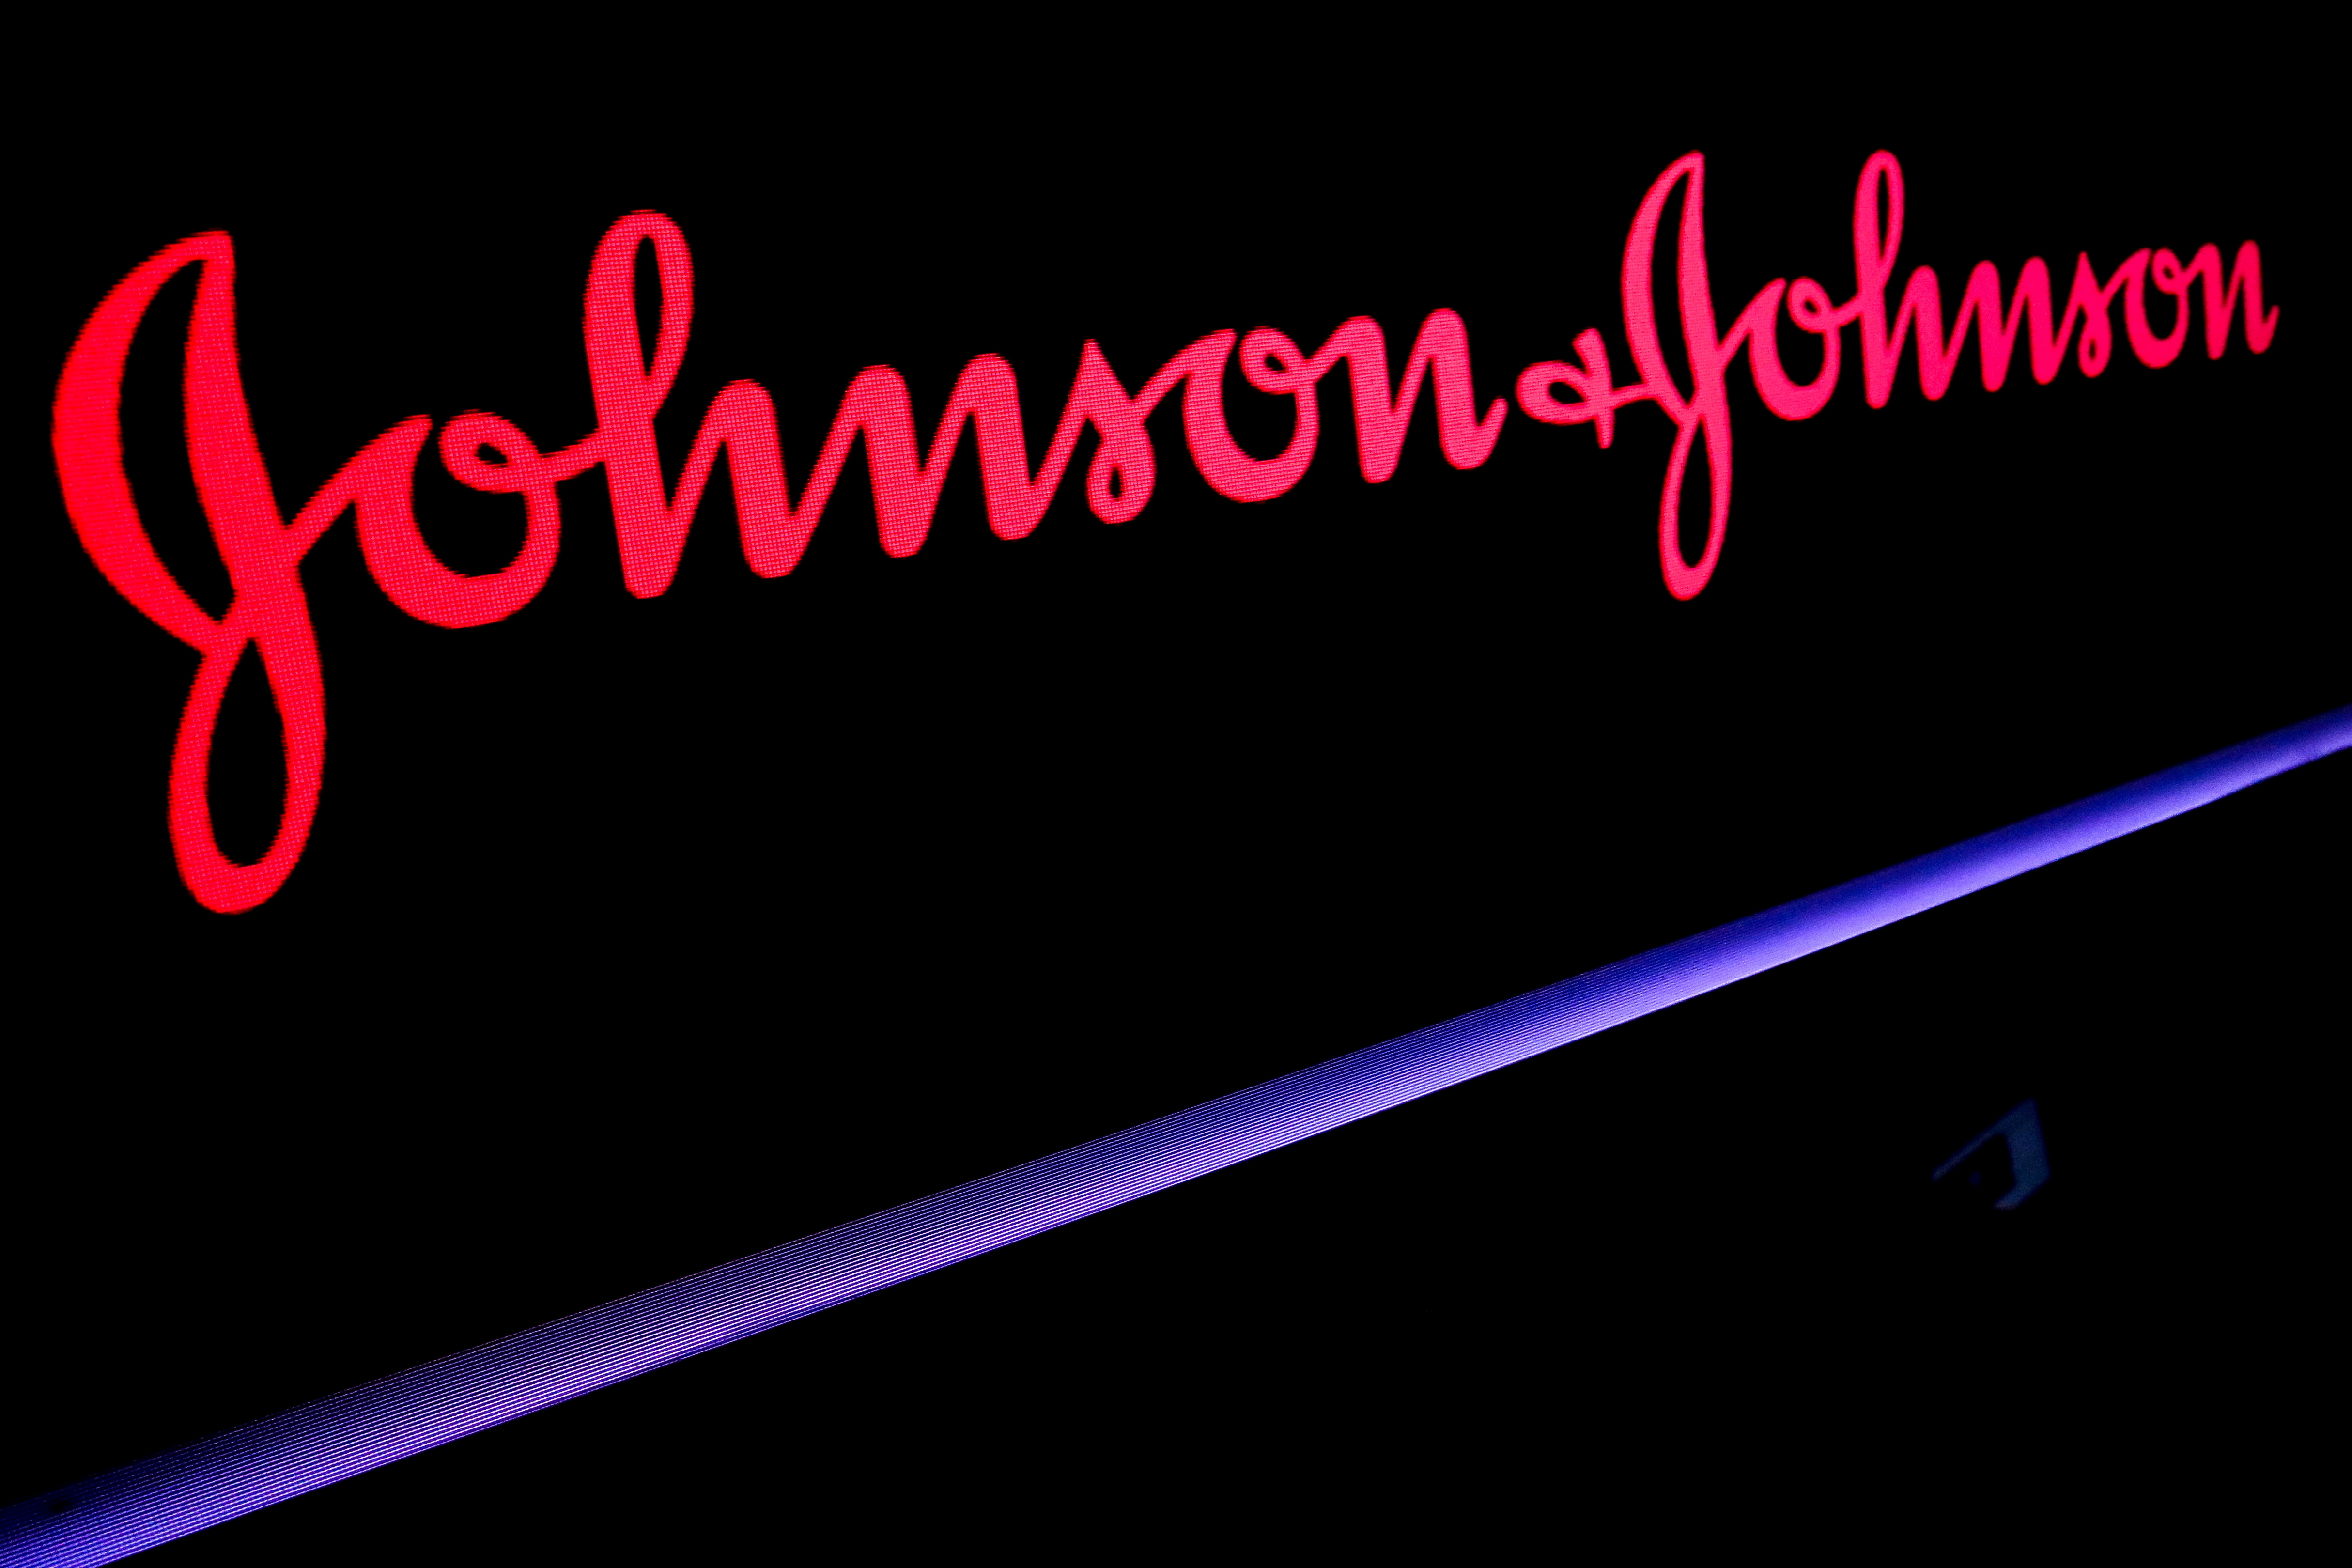 FILE PHOTO: FILE PHOTO: The Johnson & Johnson logo is displayed on a screen on the floor of the NYSE in New York